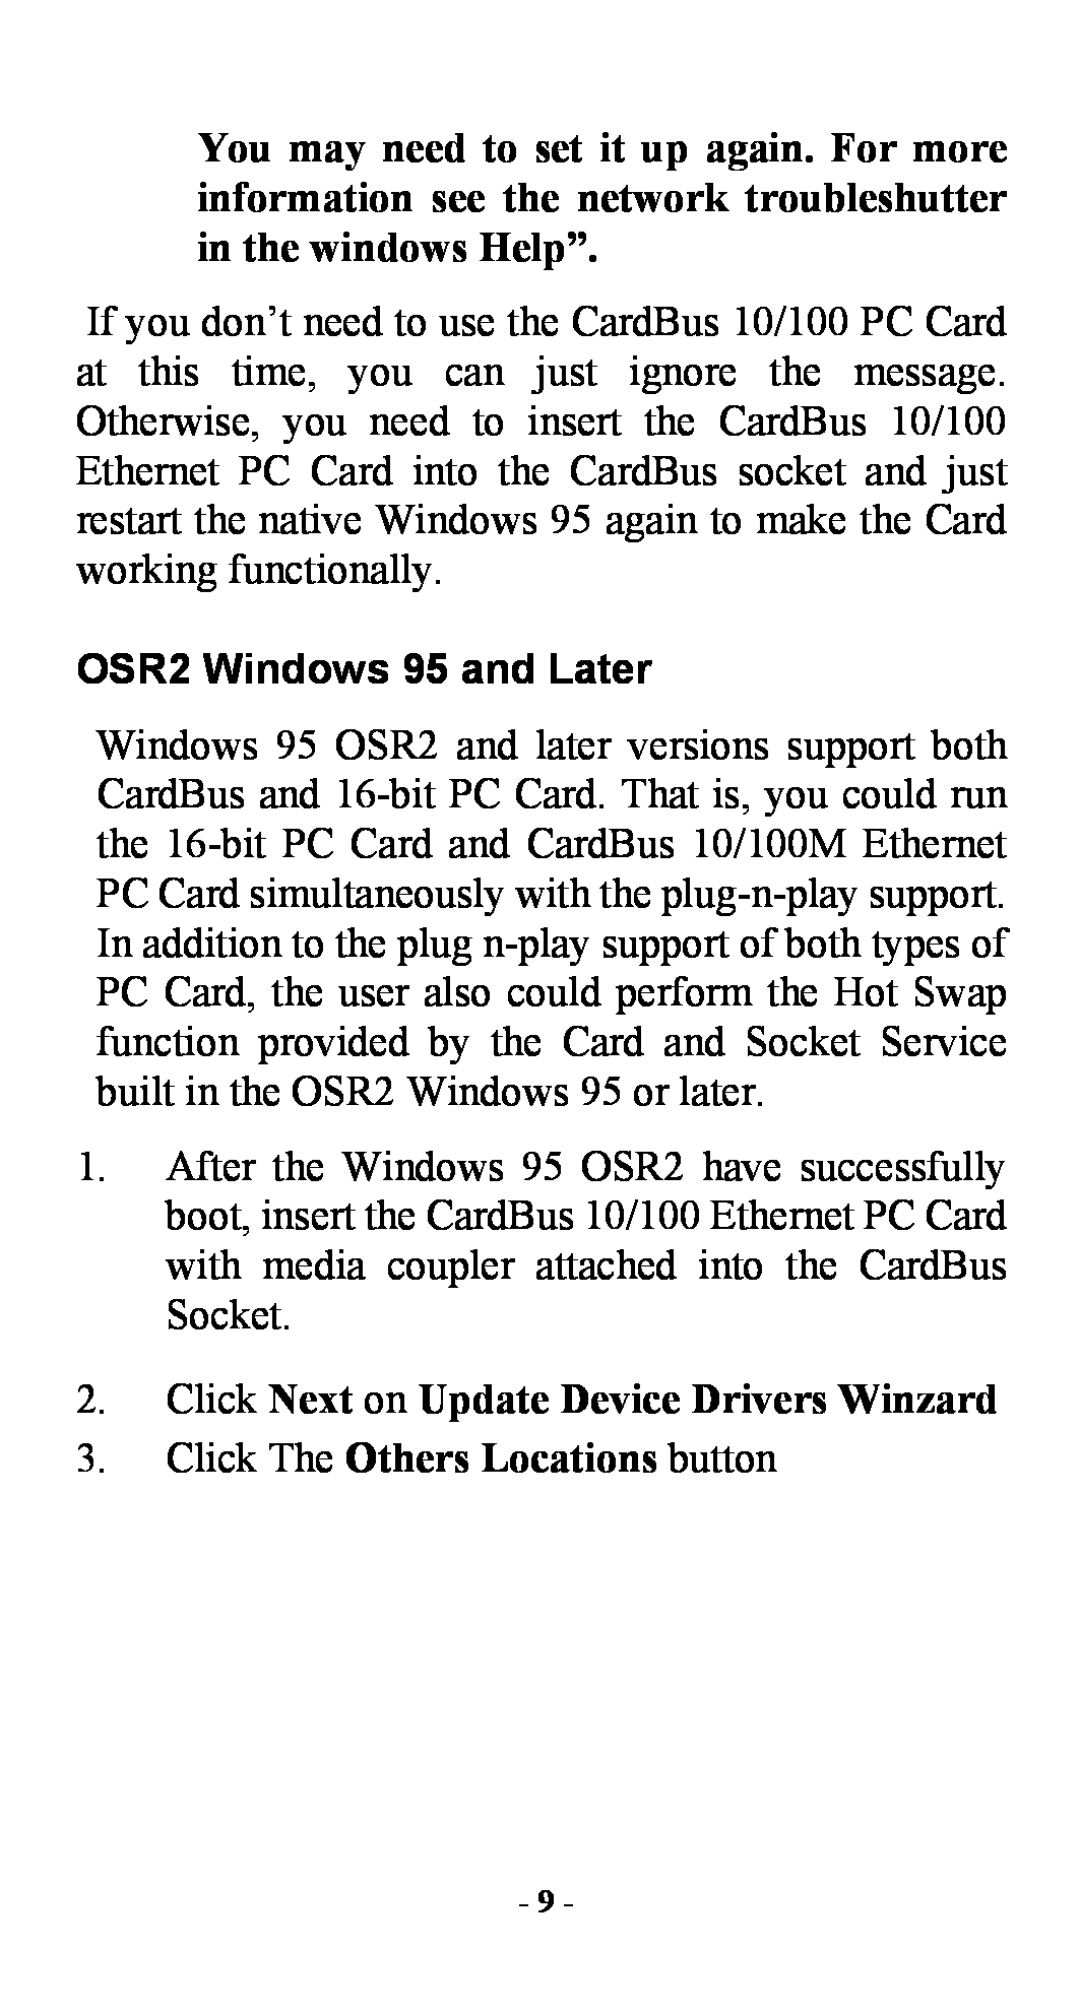 Abocom FE2000 OSR2 Windows 95 and Later, Click Next on Update Device Drivers Winzard, Click The Others Locations button 